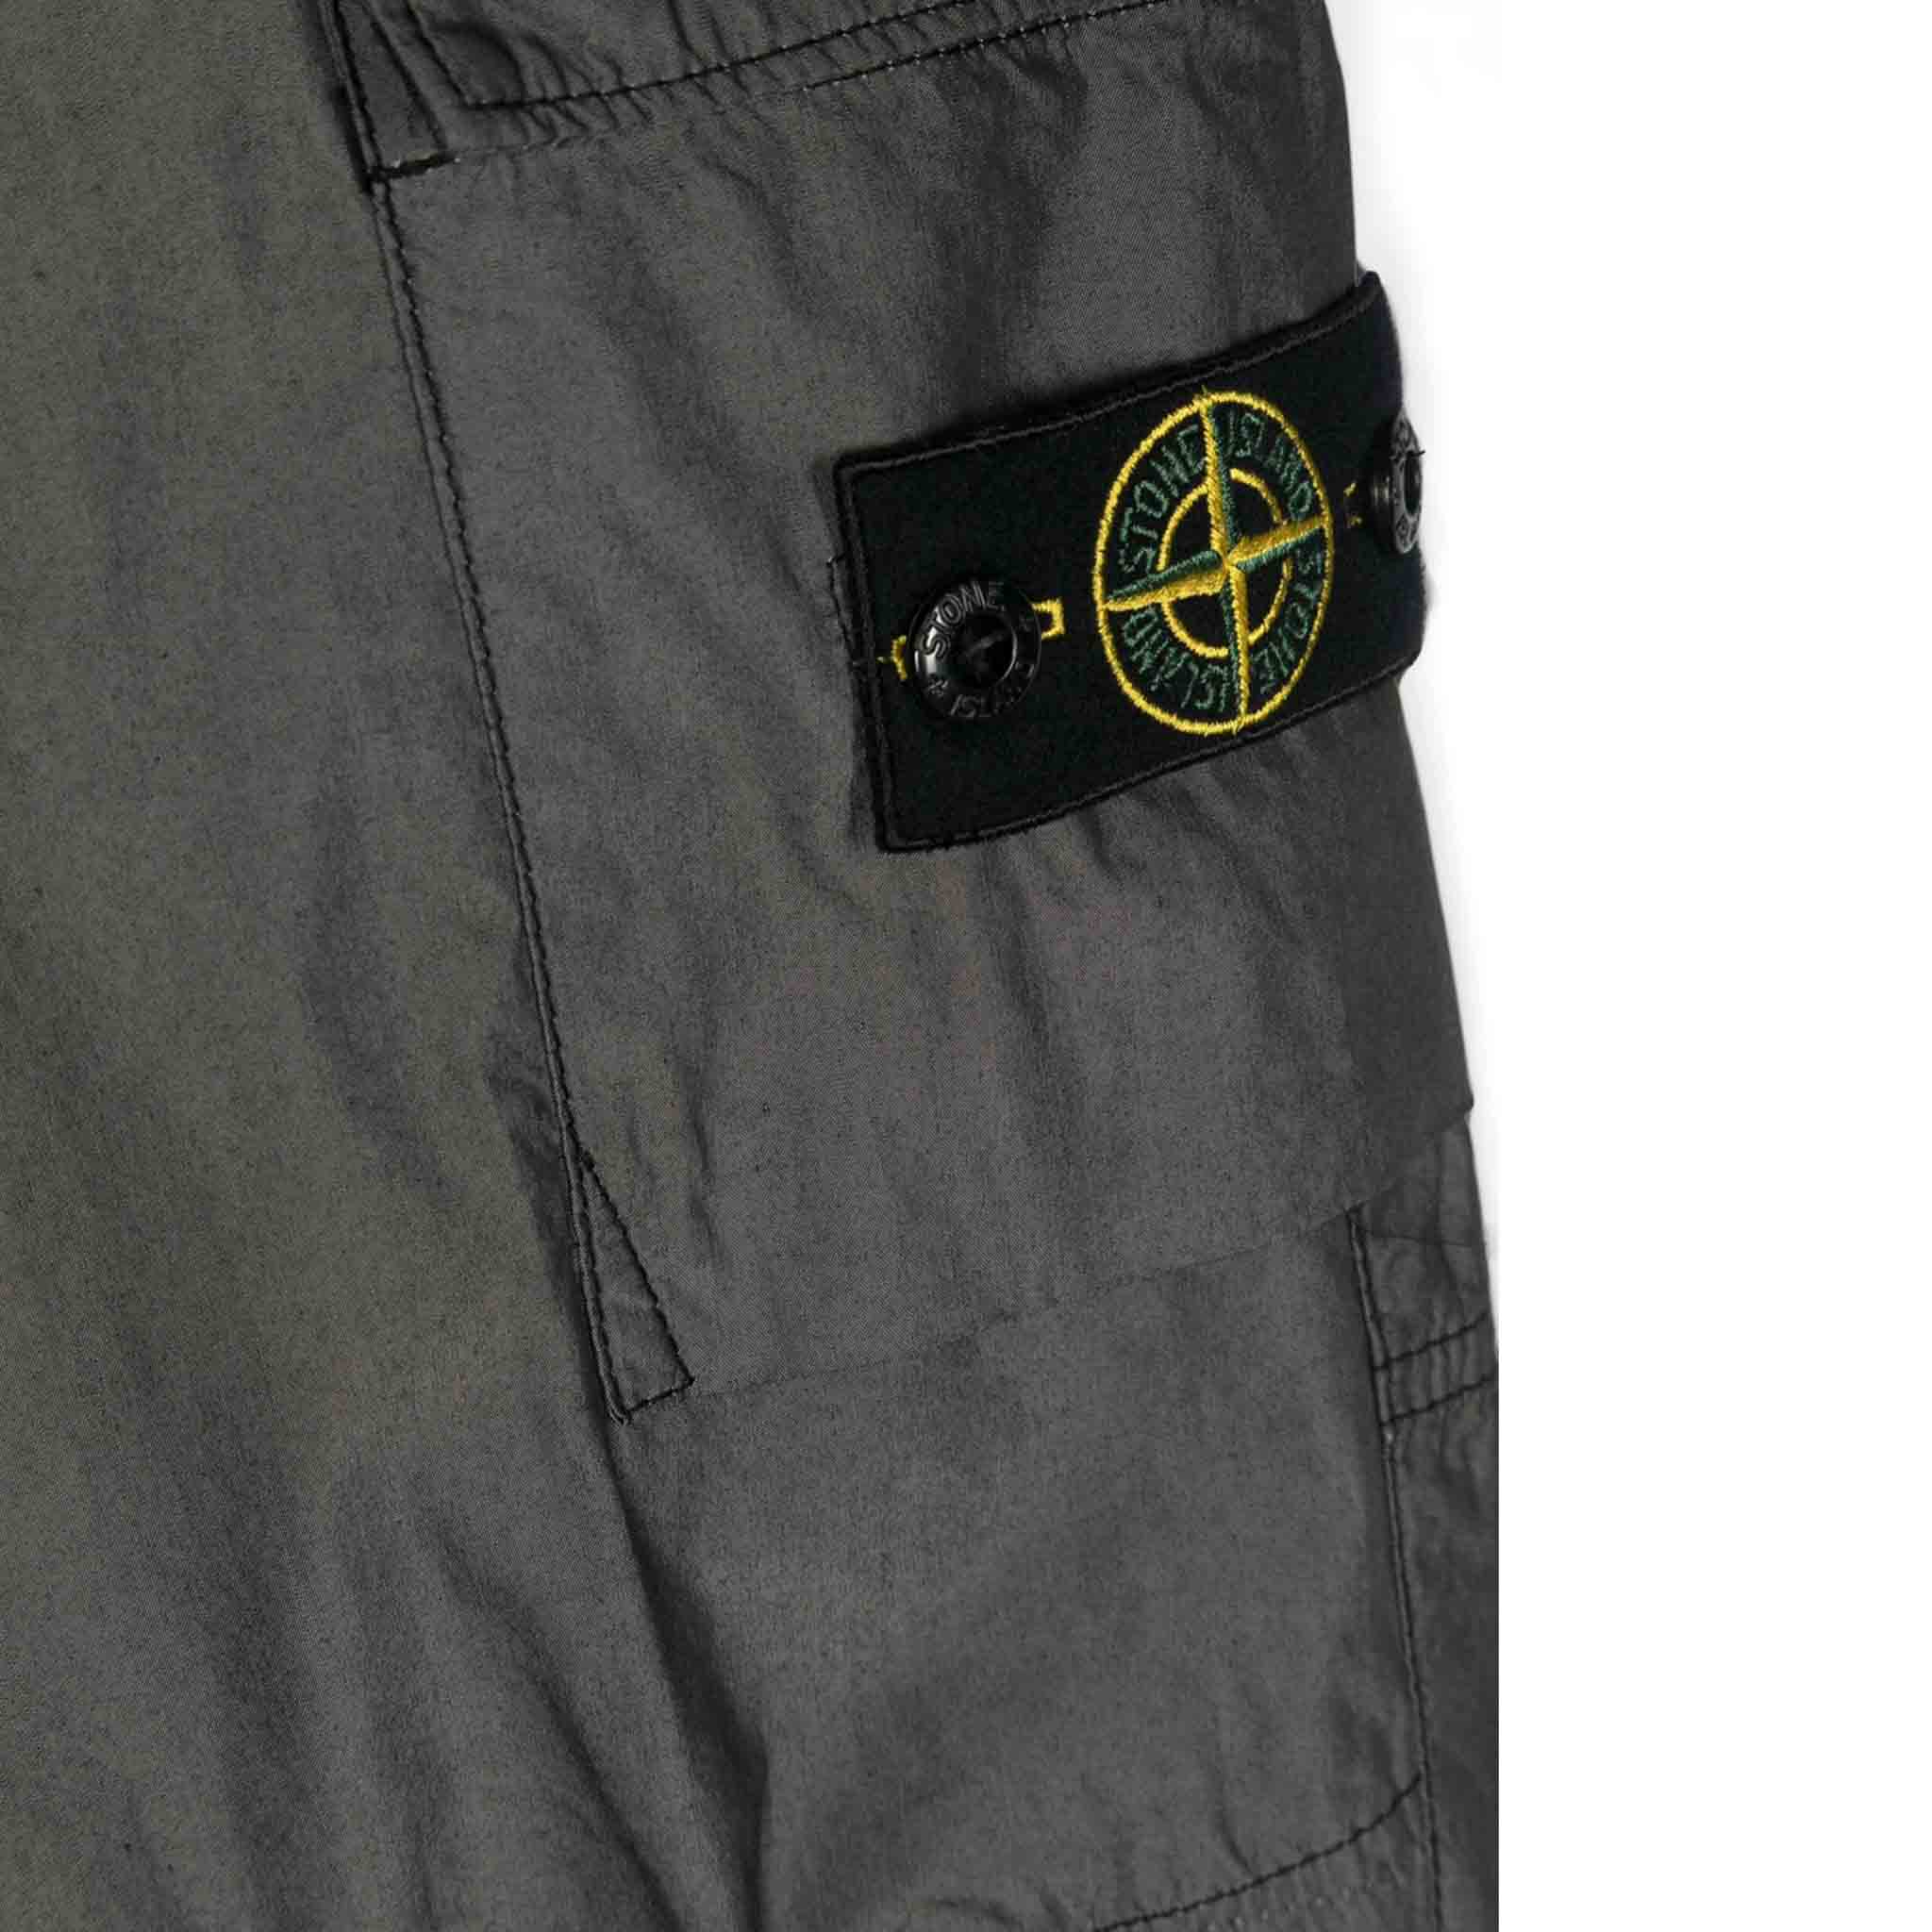 Stone Island Junior Cotton/ Polyester Cargo Trousers in Washed Black